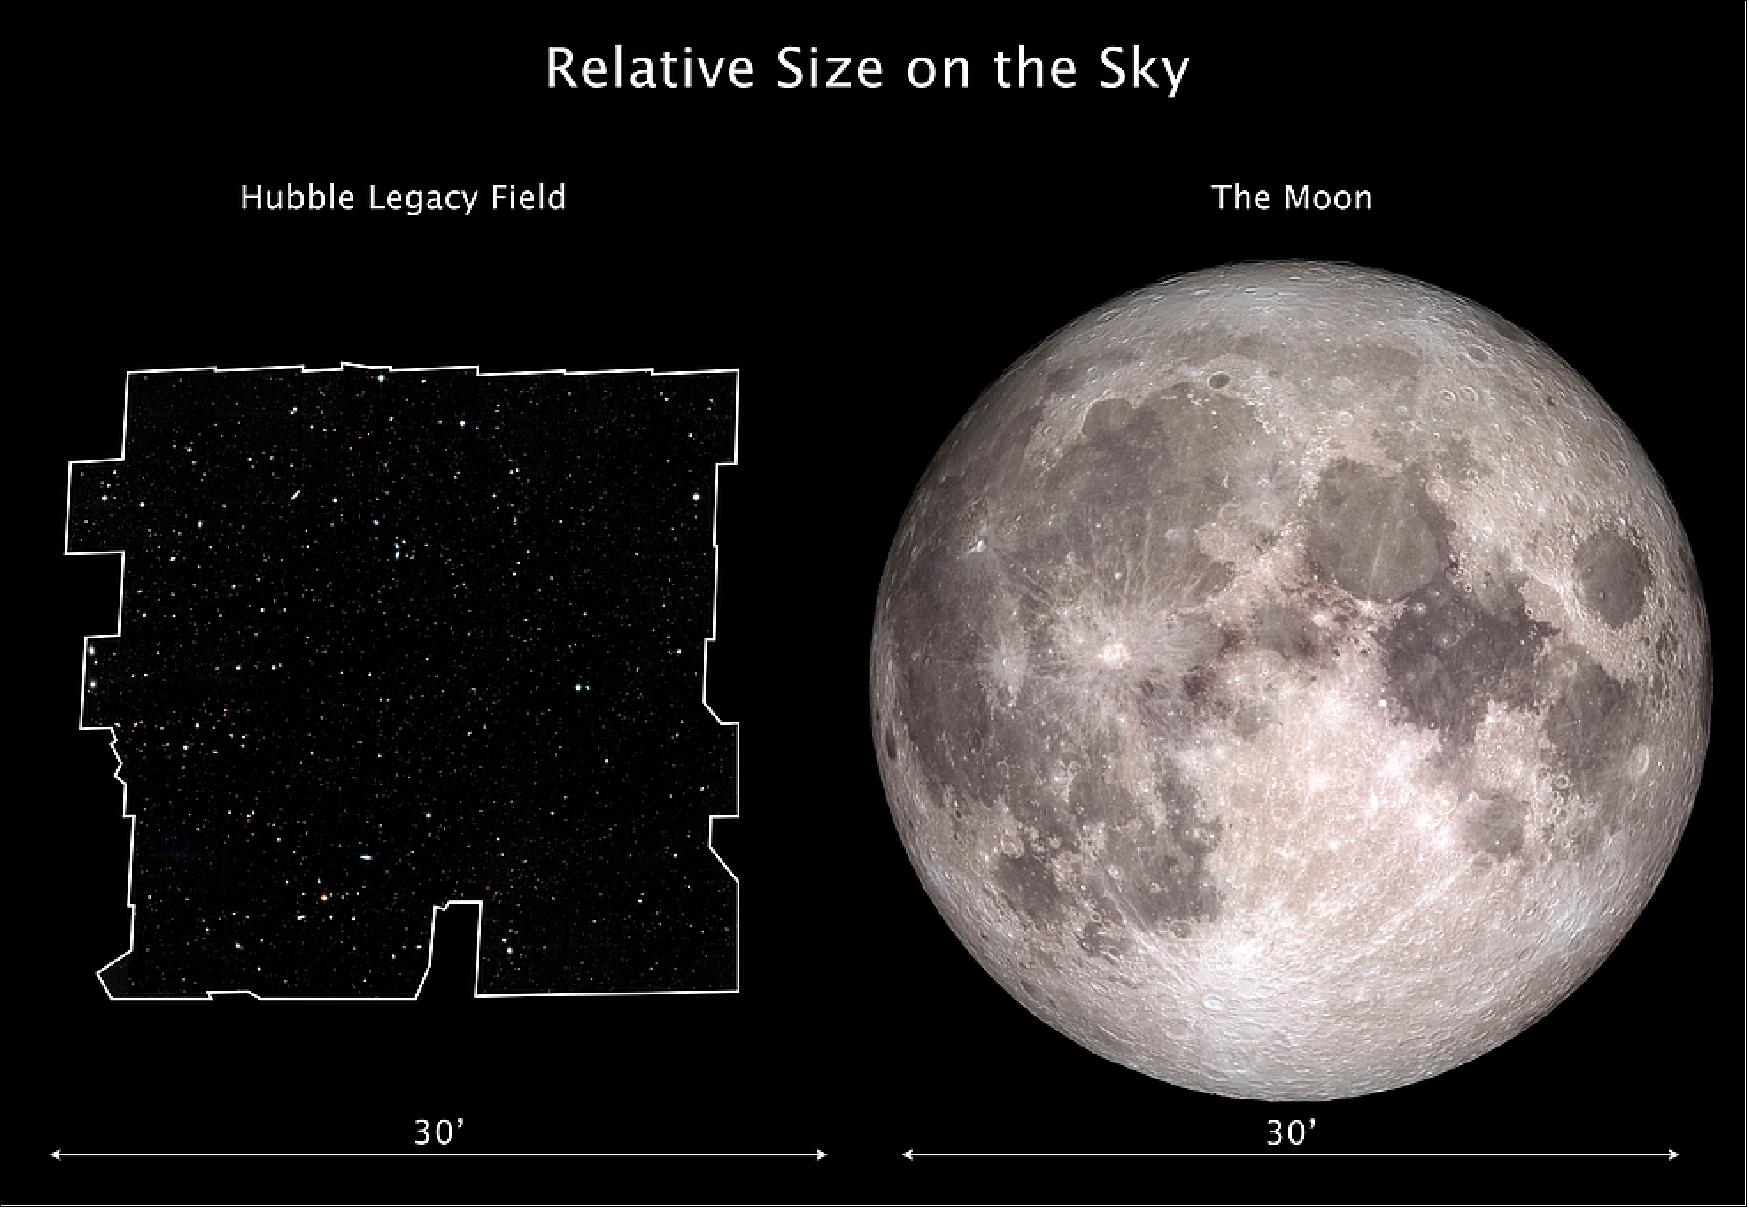 Figure 53: This graphic compares the dimensions of the Hubble Legacy Field on the sky with the angular size of the Moon. The Hubble Legacy Field is one of the widest views ever taken of the universe with Hubble. The new portrait, a mosaic of nearly 7,500 exposures, covers almost the width of the full Moon. The Moon and the Legacy Field each subtend about an angle of one-half a degree on the sky (or half the width of your forefinger held at arm's length), image credit: Hubble Legacy Field Image: NASA, ESA, and G. Illingworth and D. Magee (University of California, Santa Cruz); Moon Image: NASA, Goddard Space Flight Center and Arizona State University